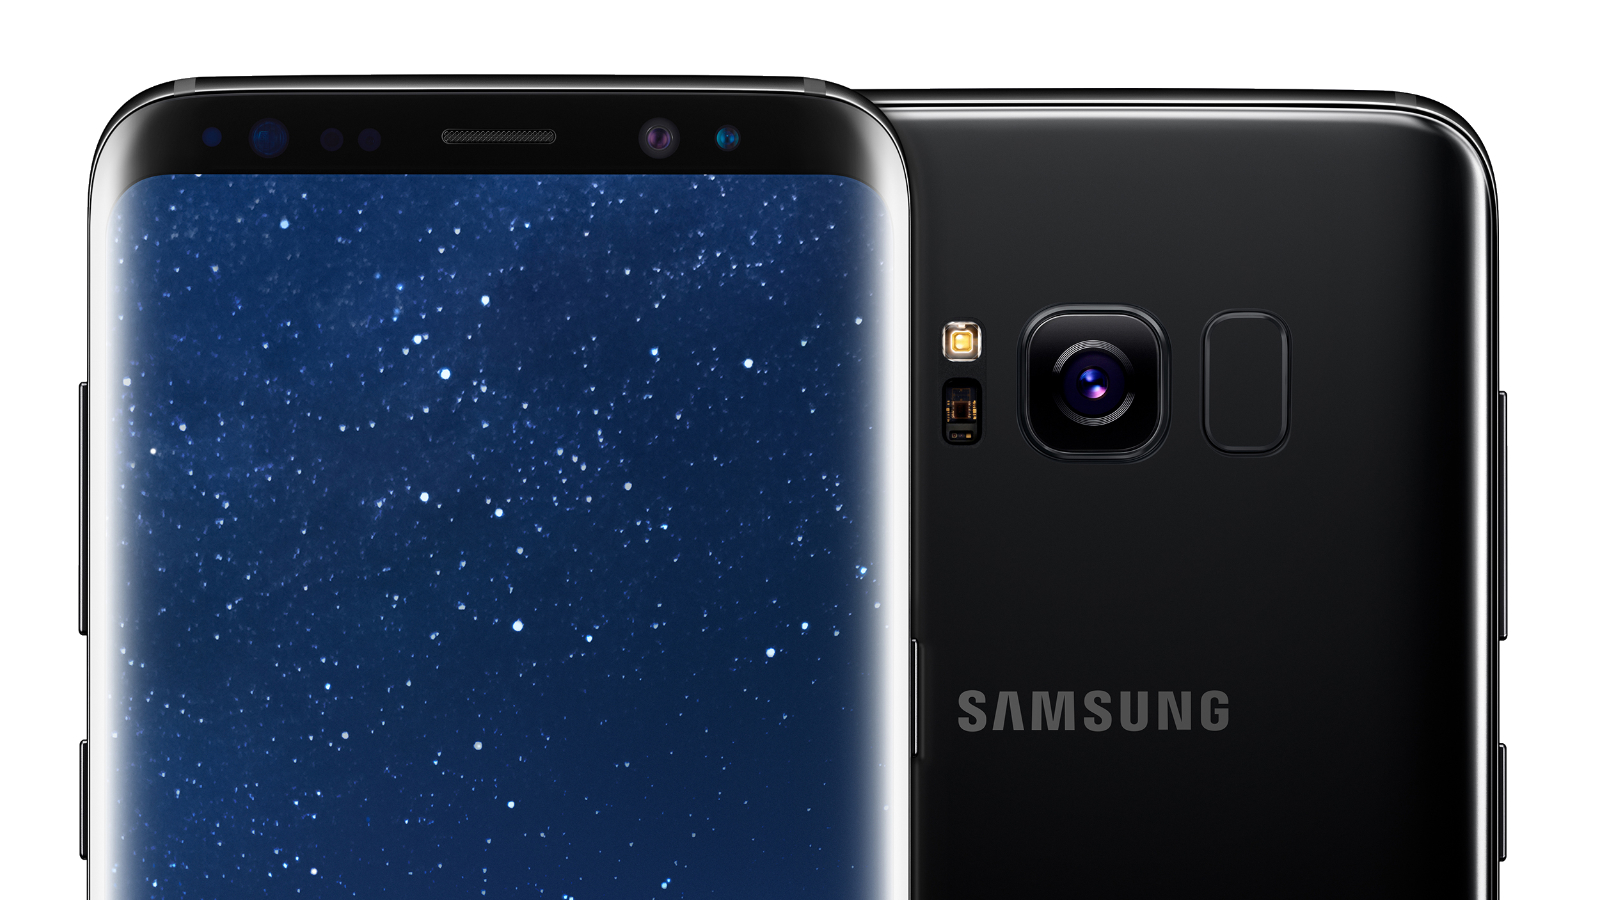 Midnight Black color variant of Galaxy S8 Plus